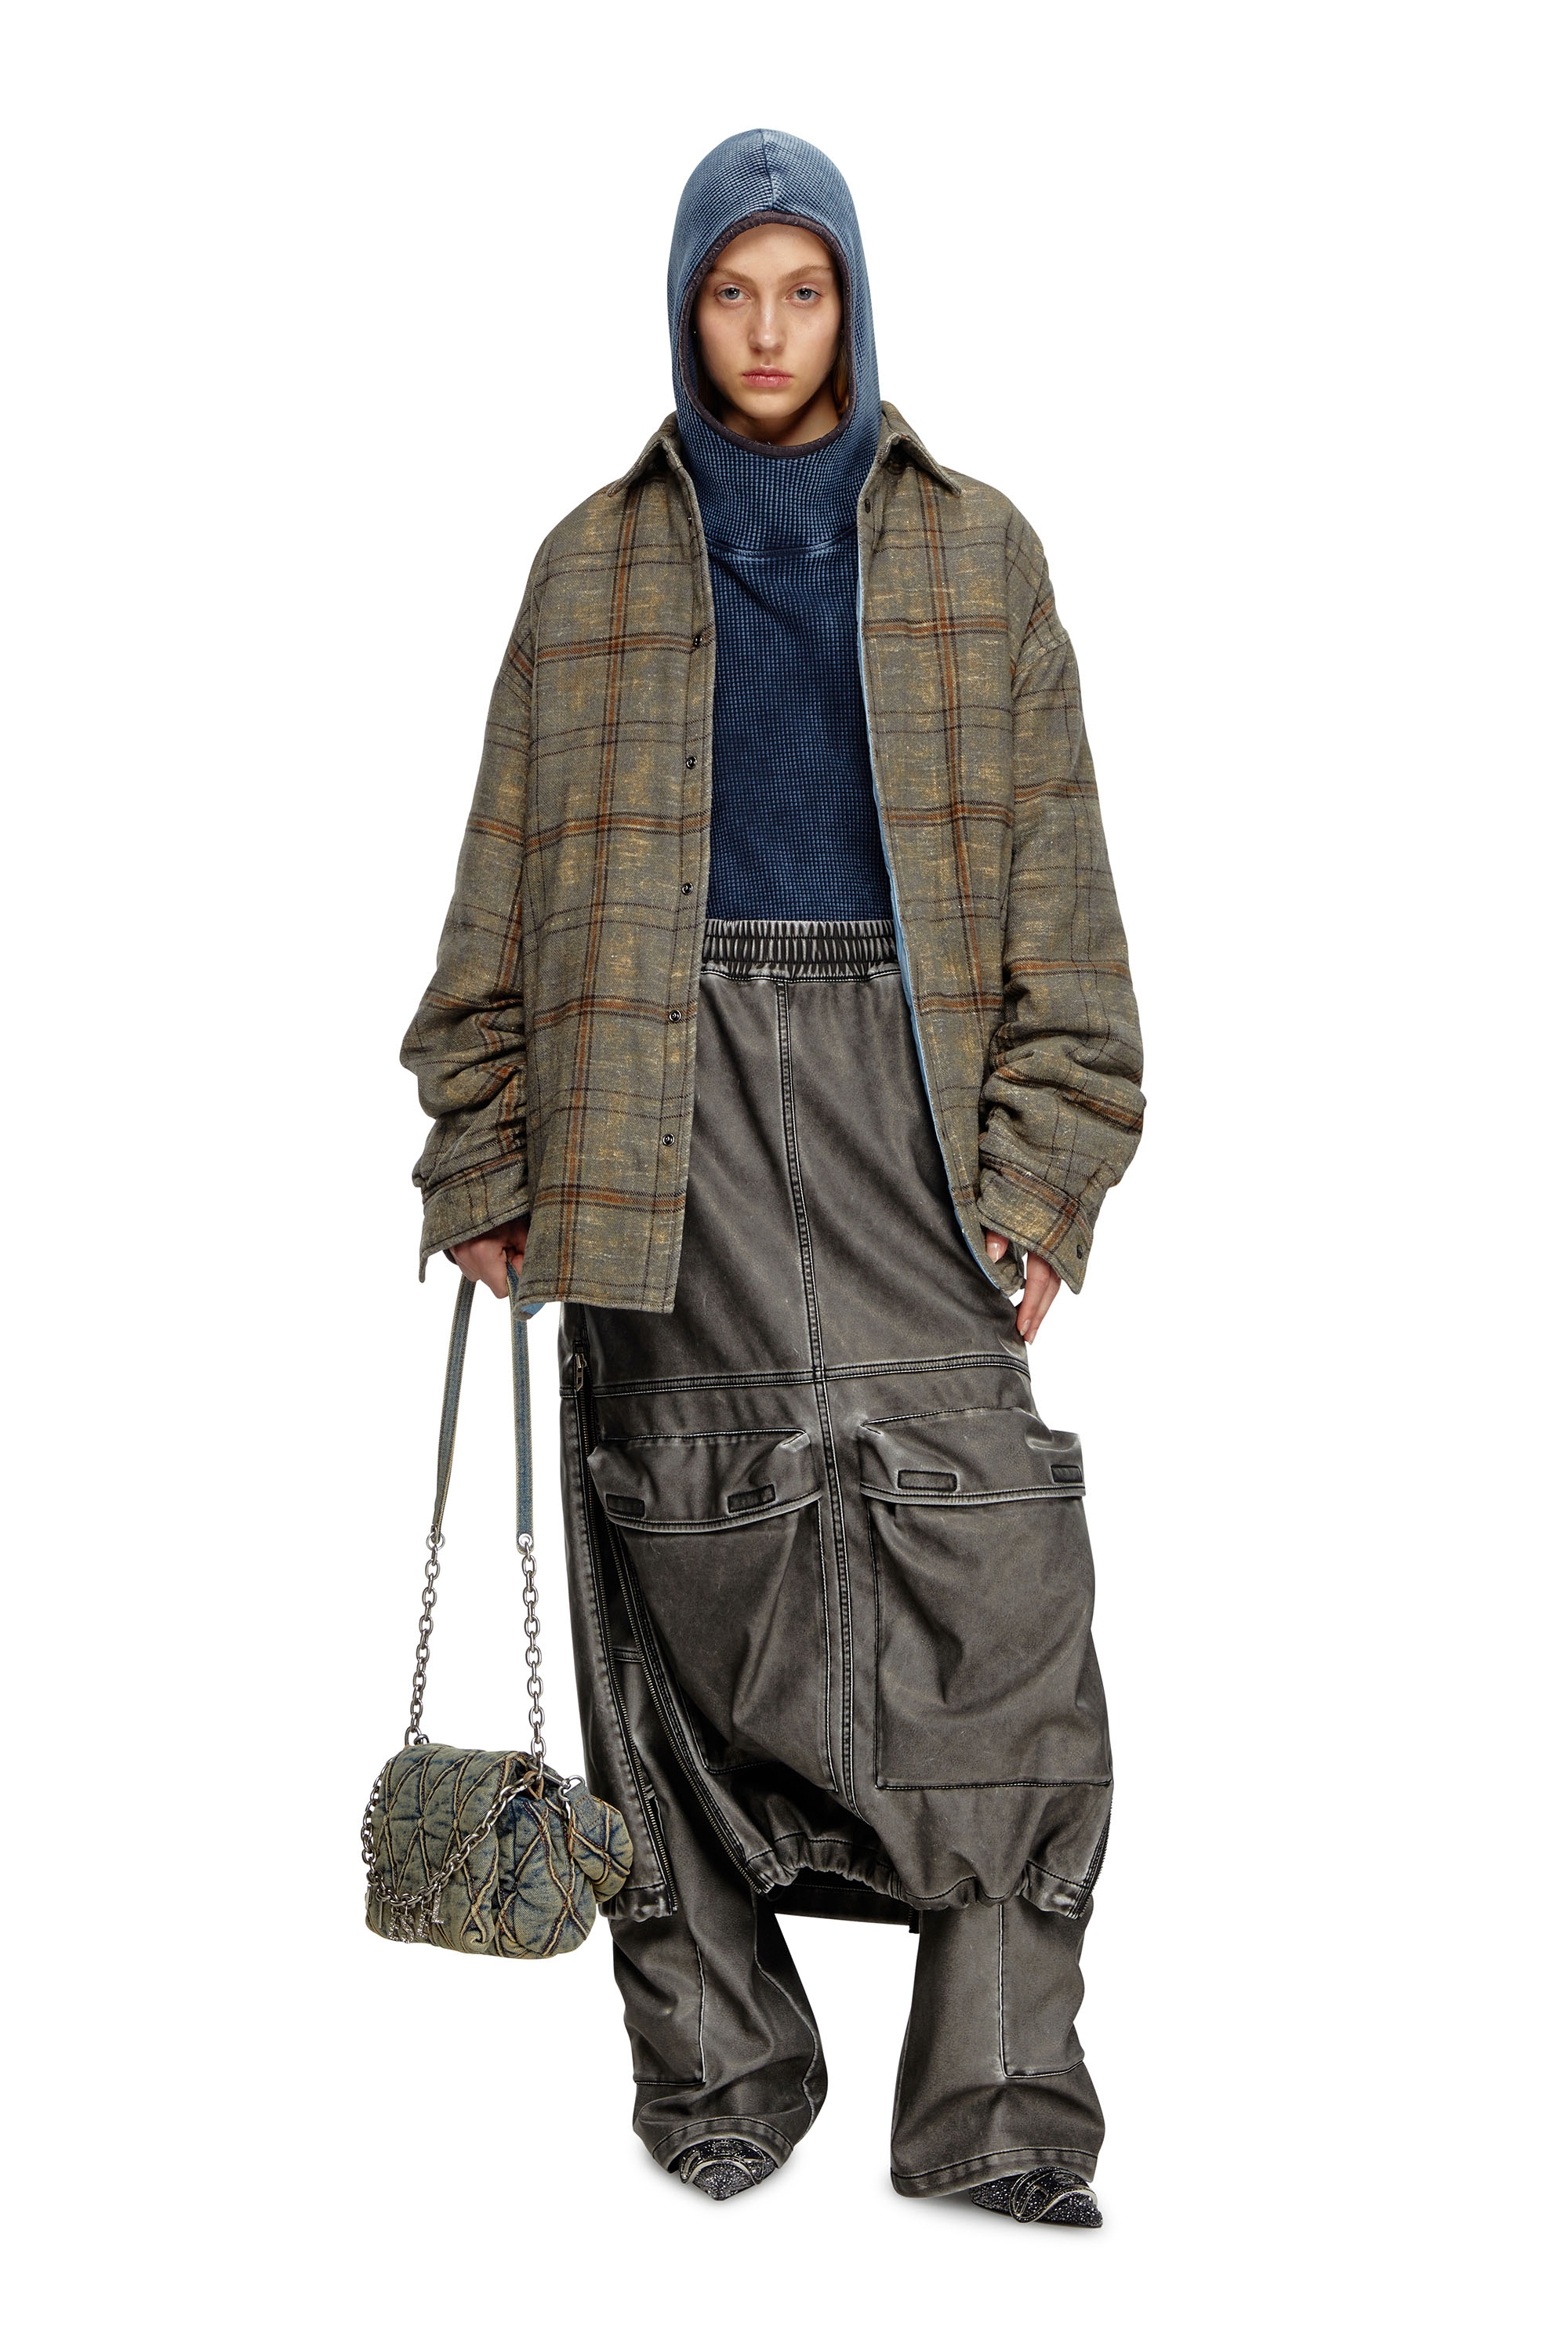 Diesel - O-DYSSEY-P1, Female Long skirt in washed tech fabric in グレー - Image 1